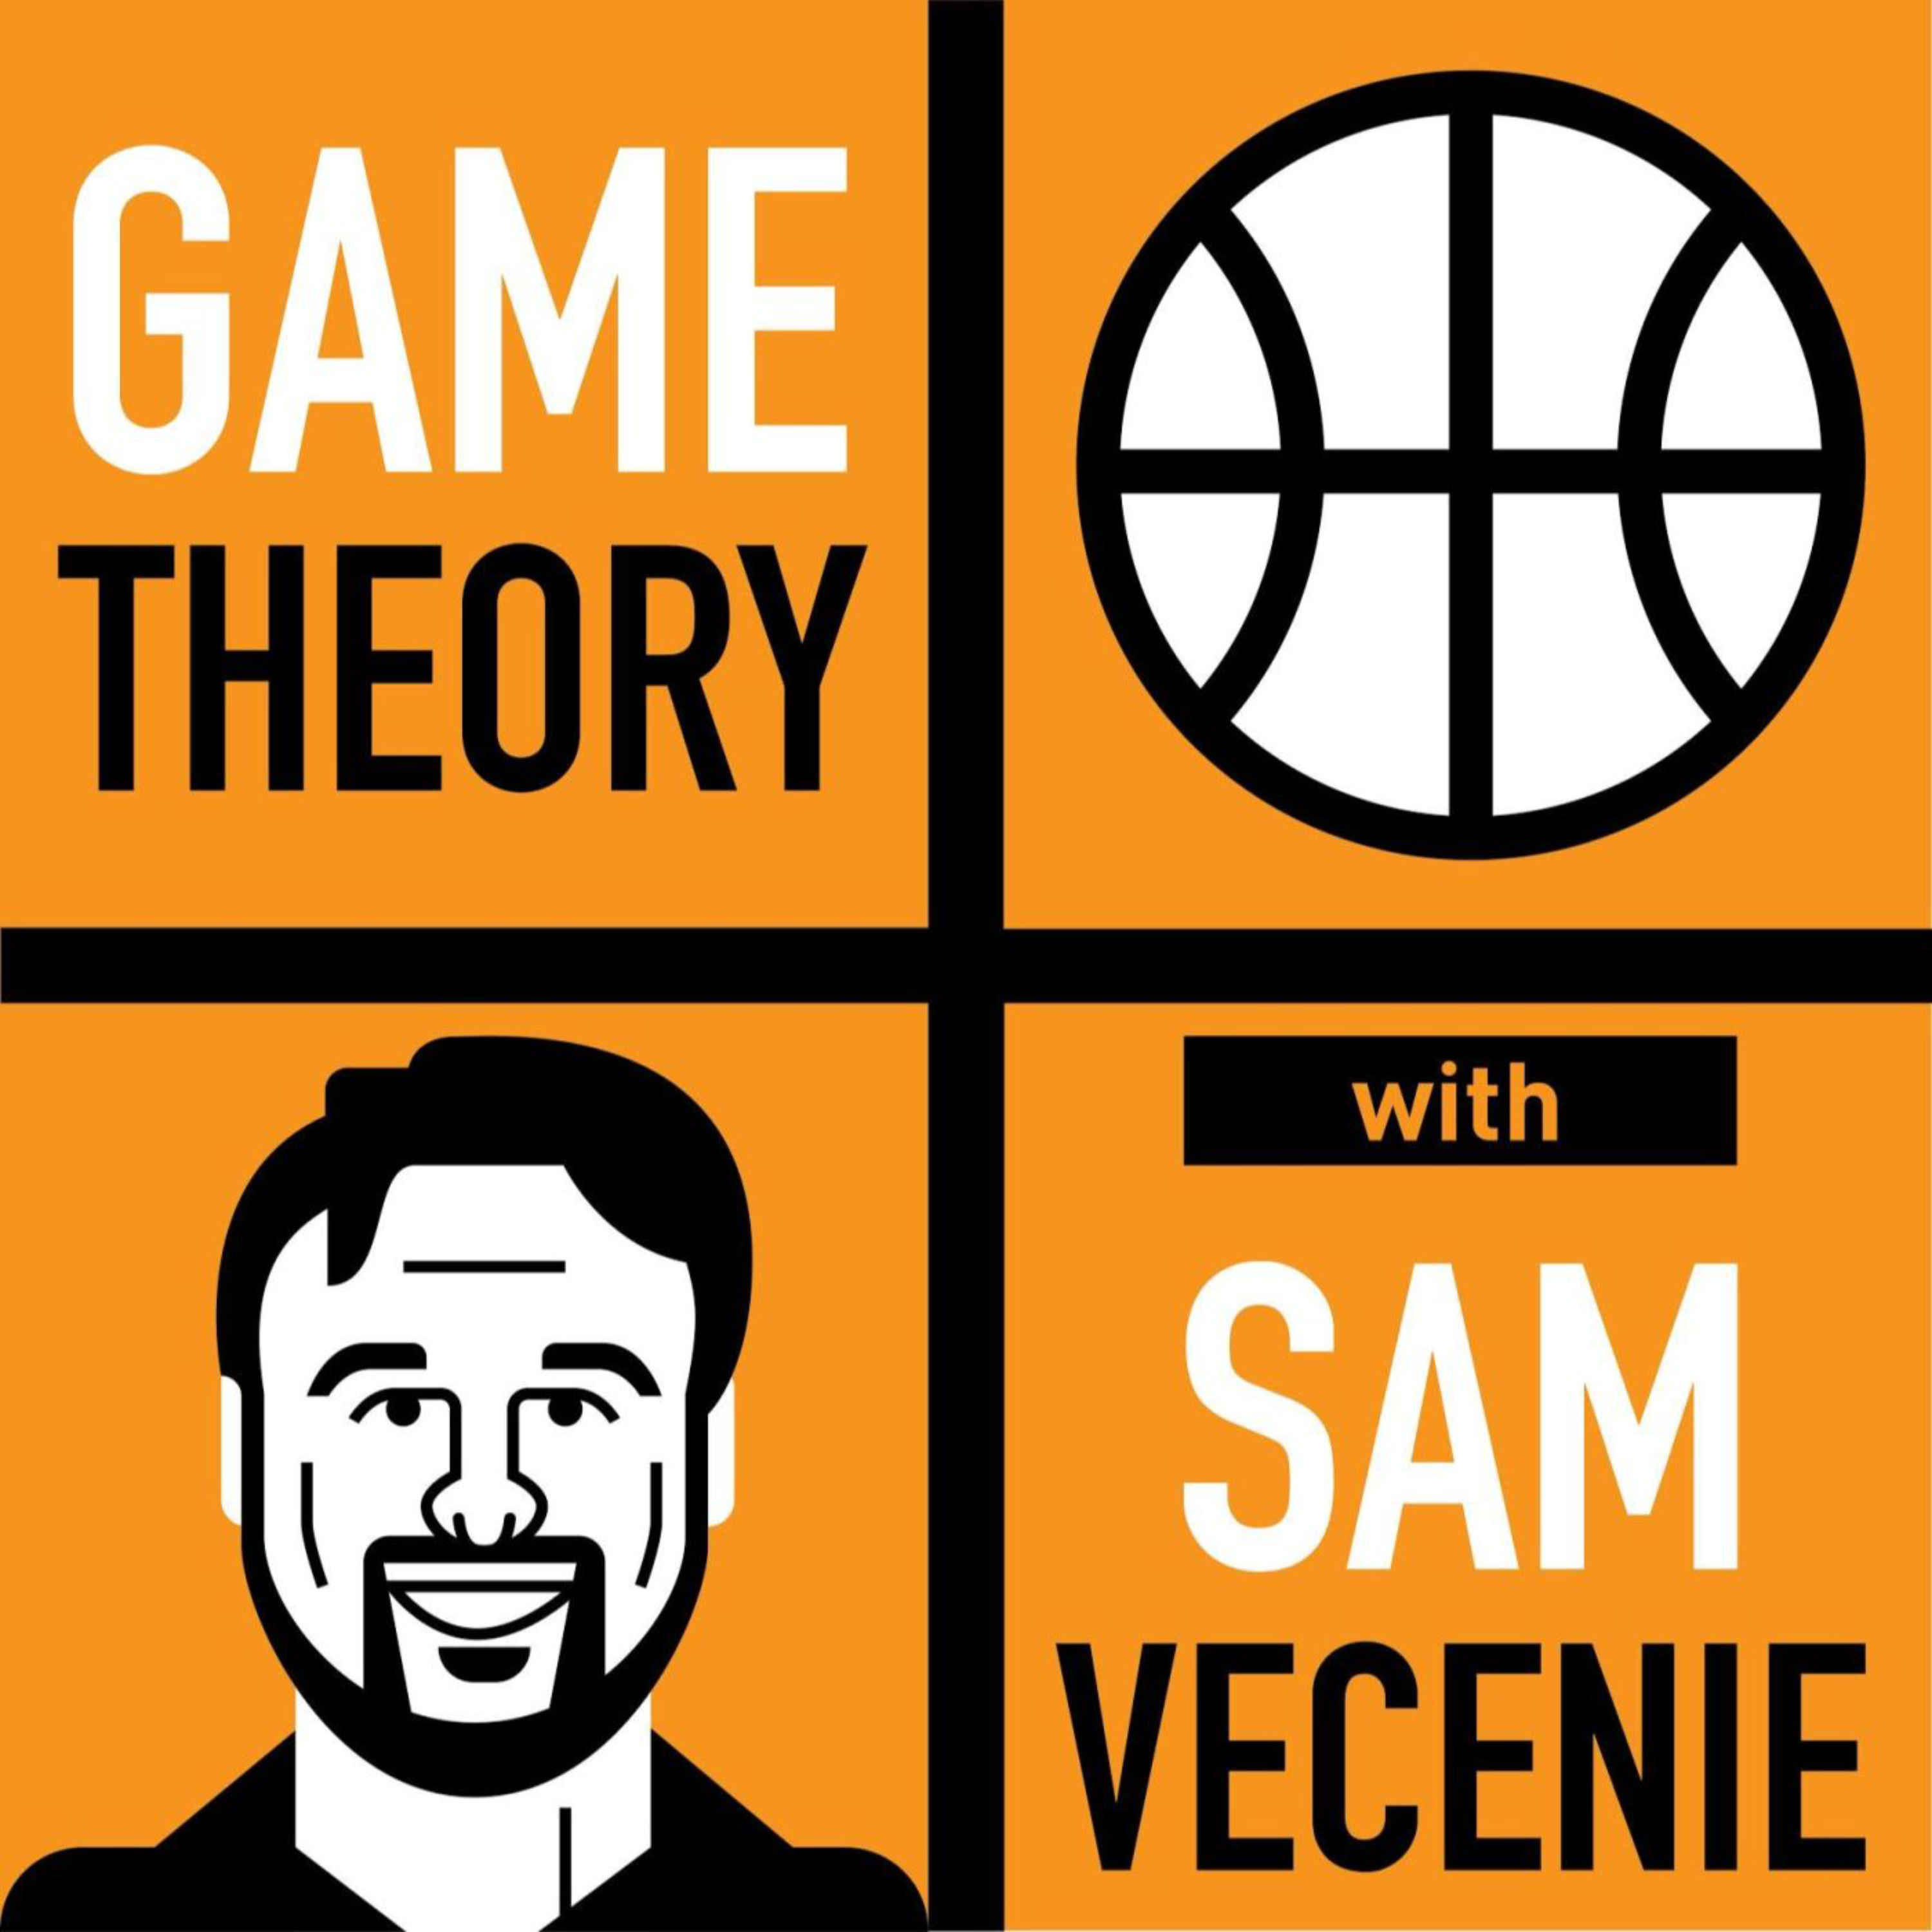 Fresh update on "carroll" discussed on Game Theory Podcast